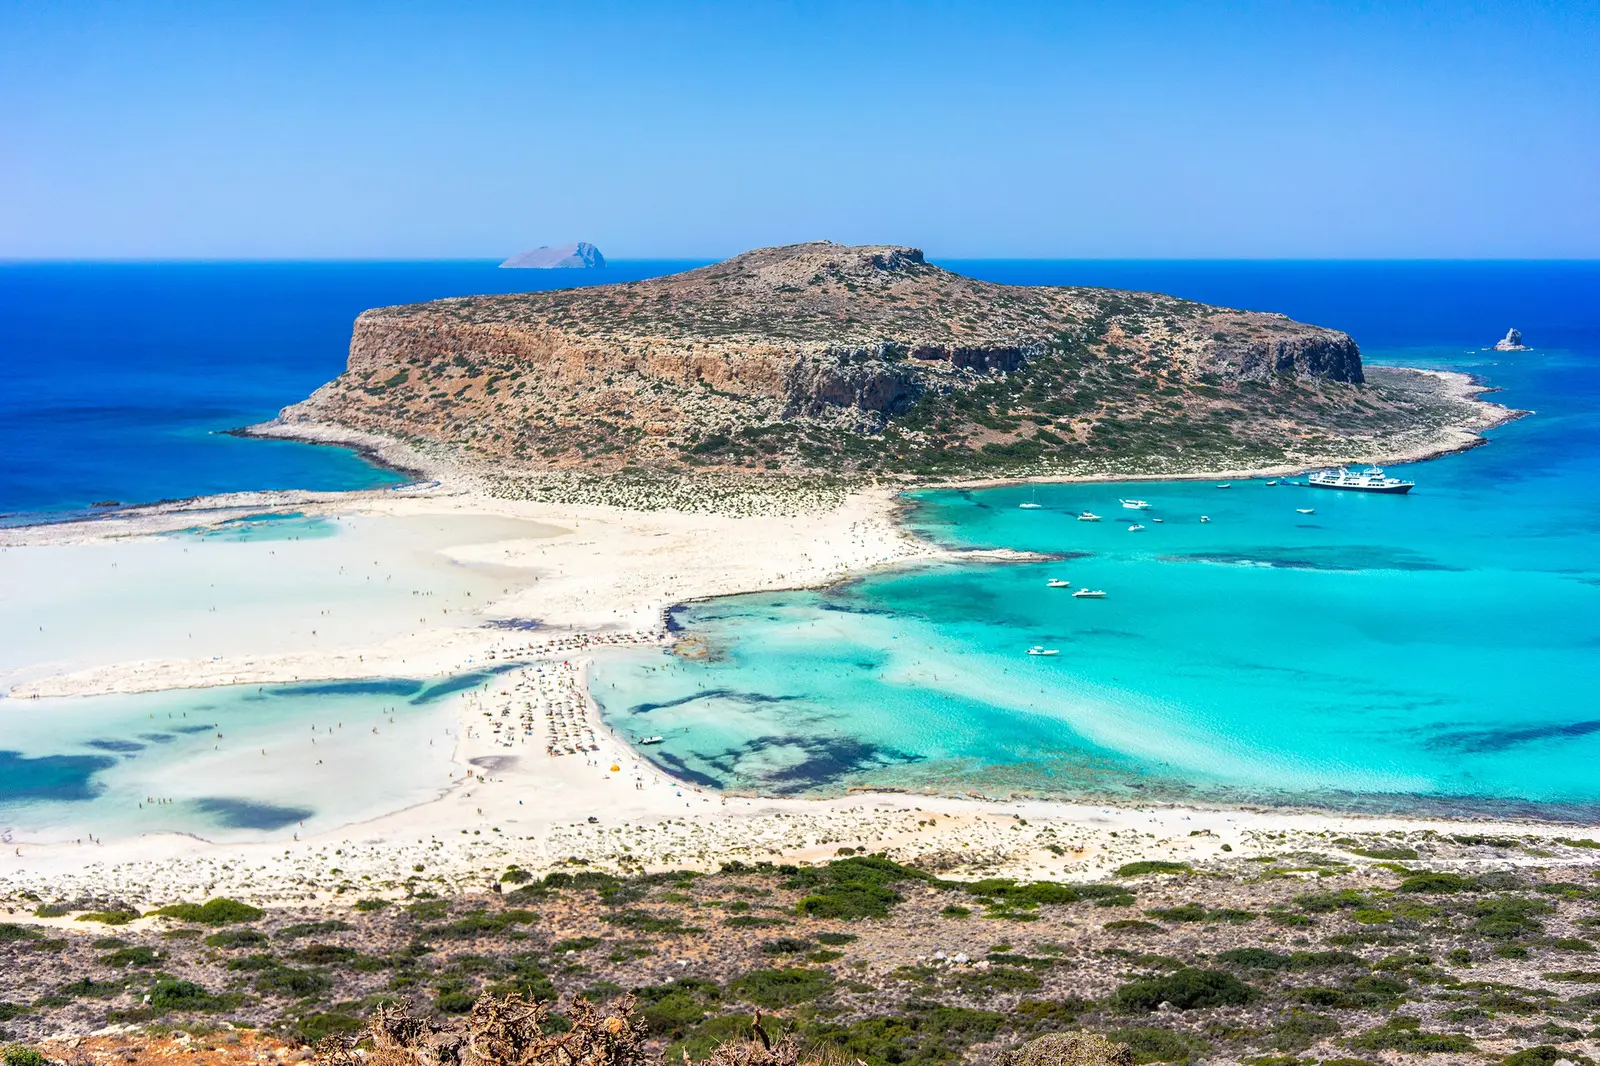 View from the top of a hill overlooking Balos Lagoon with white sand and shallow turquoise water running out to Gramvousa Island, most beautiful beach in Chania.